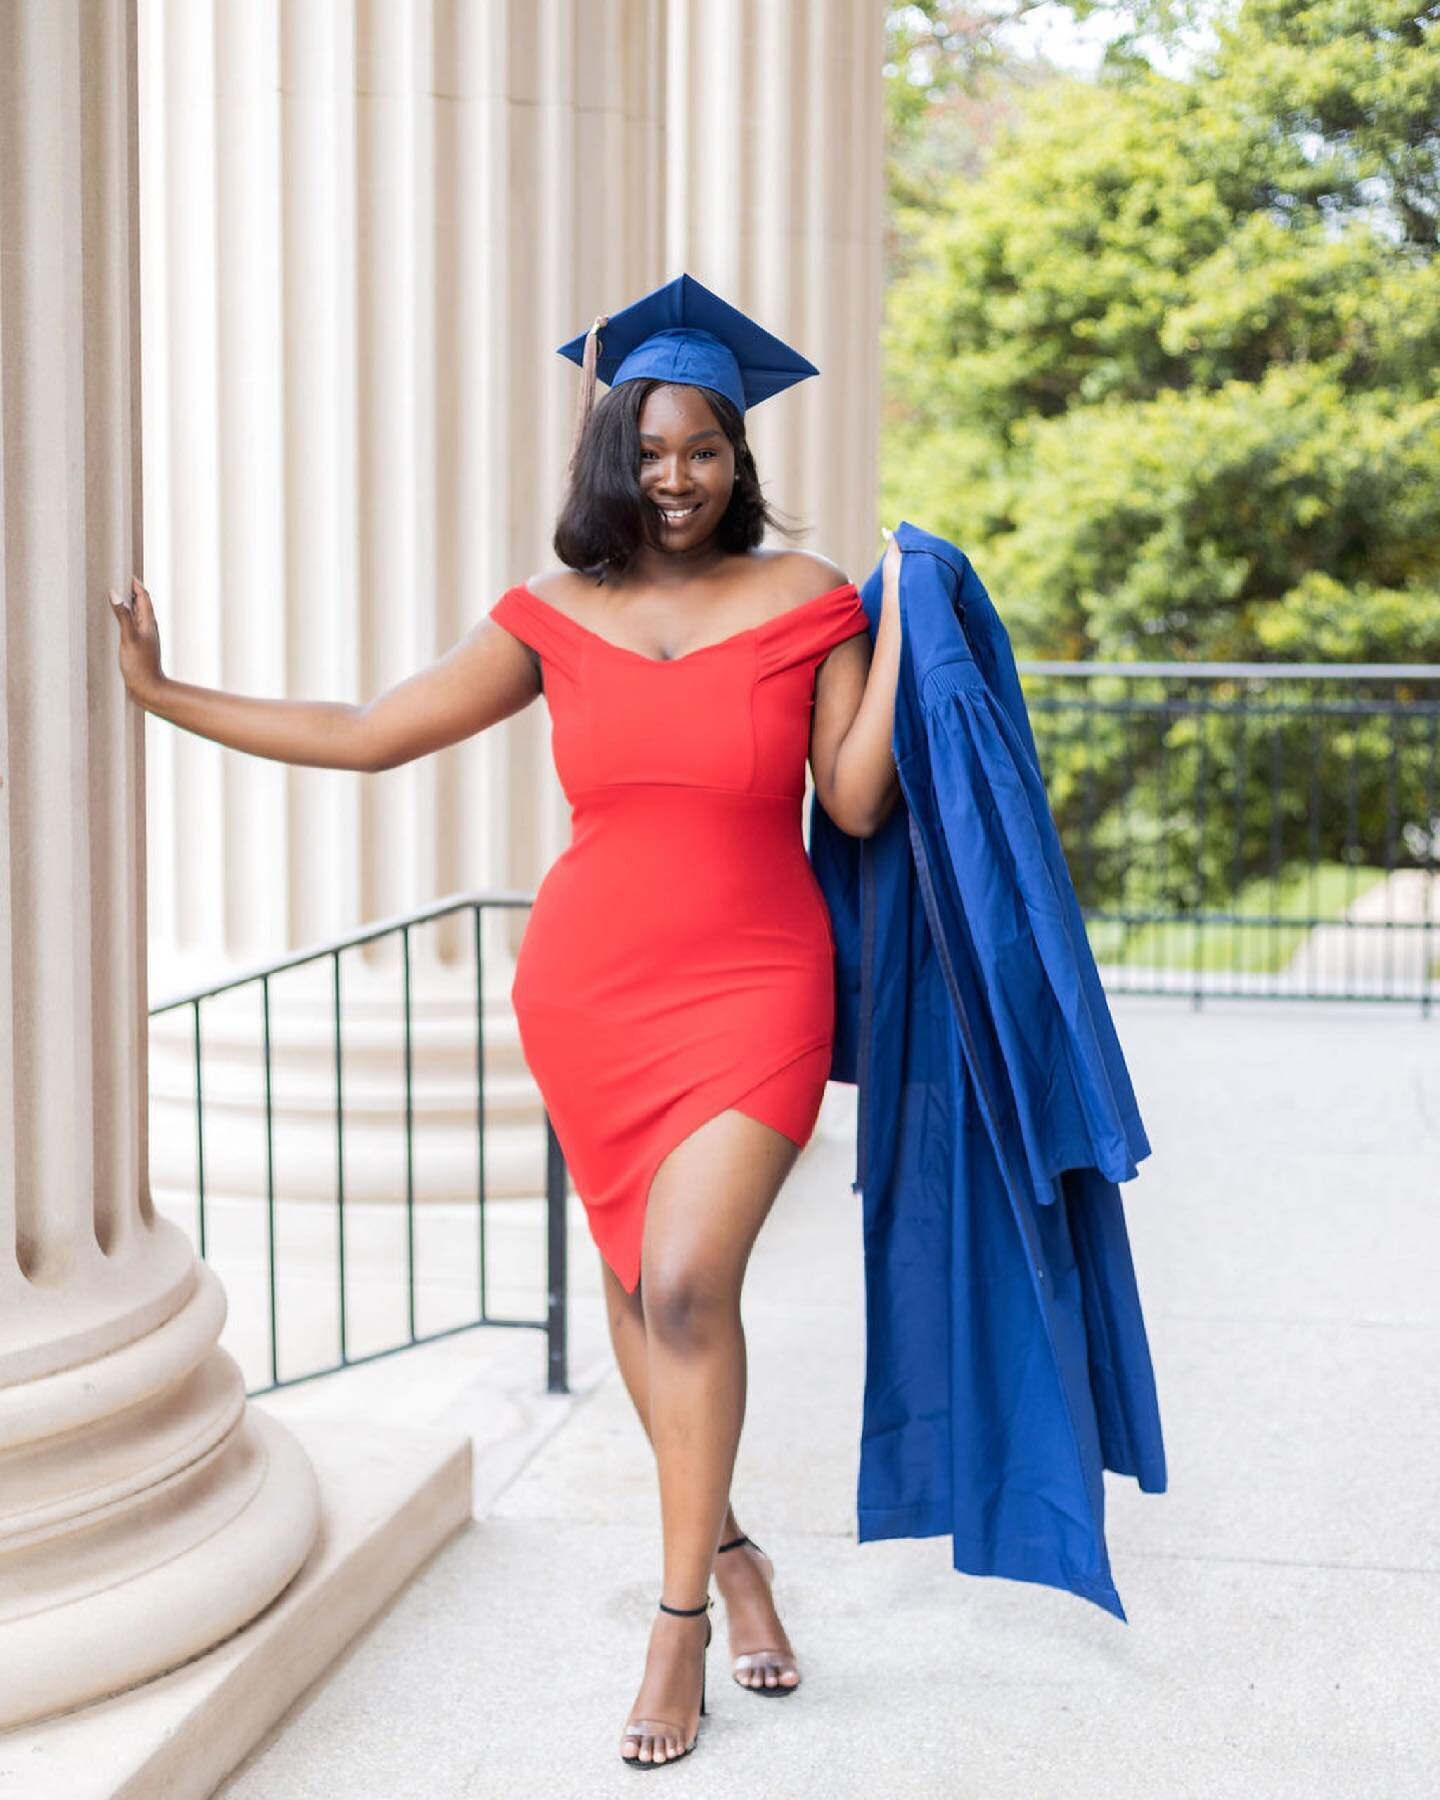 SMU college graduate 🎉👏🏾

The gorgeous graduate and campus just made this session so perfect! Swipe to see the champagne pop 🍾